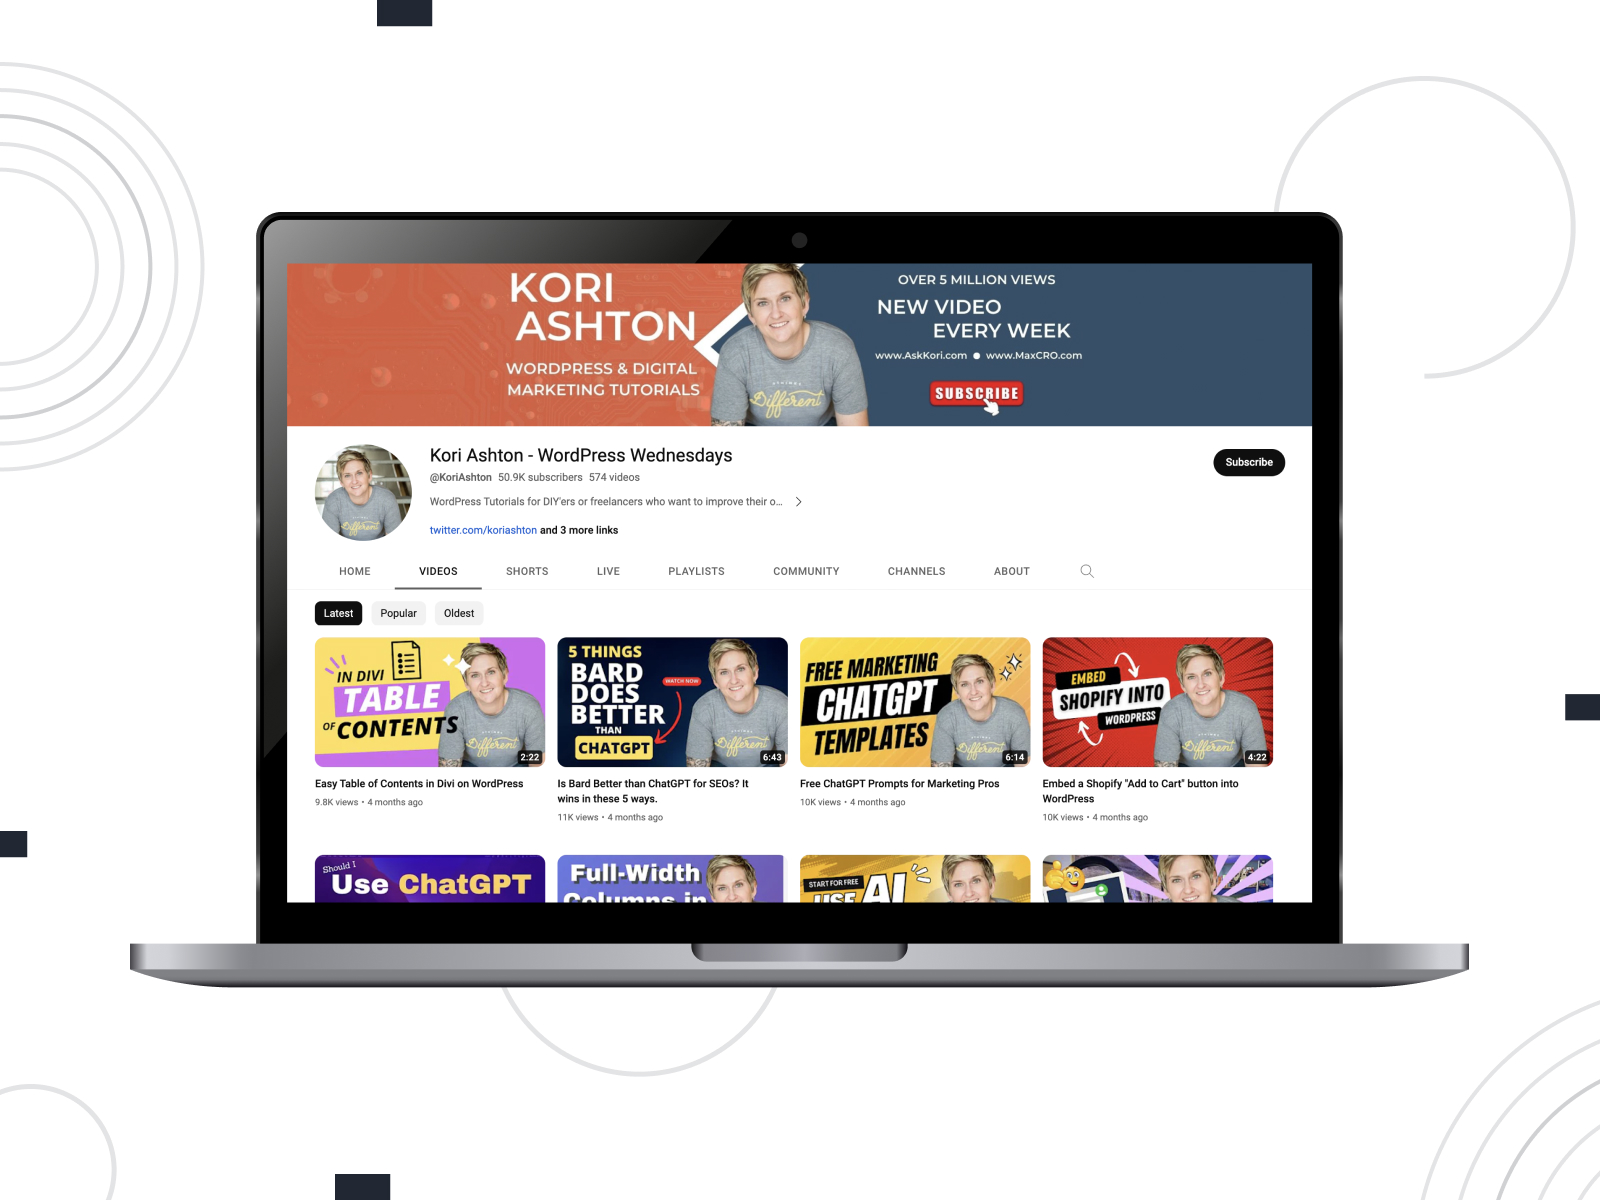 Image of Kori Ashton, one of the best WordPress YouTube channels, hosted by a notable influencer who regularly publishes new plugin reviews and online marketing tips for WordPress users.